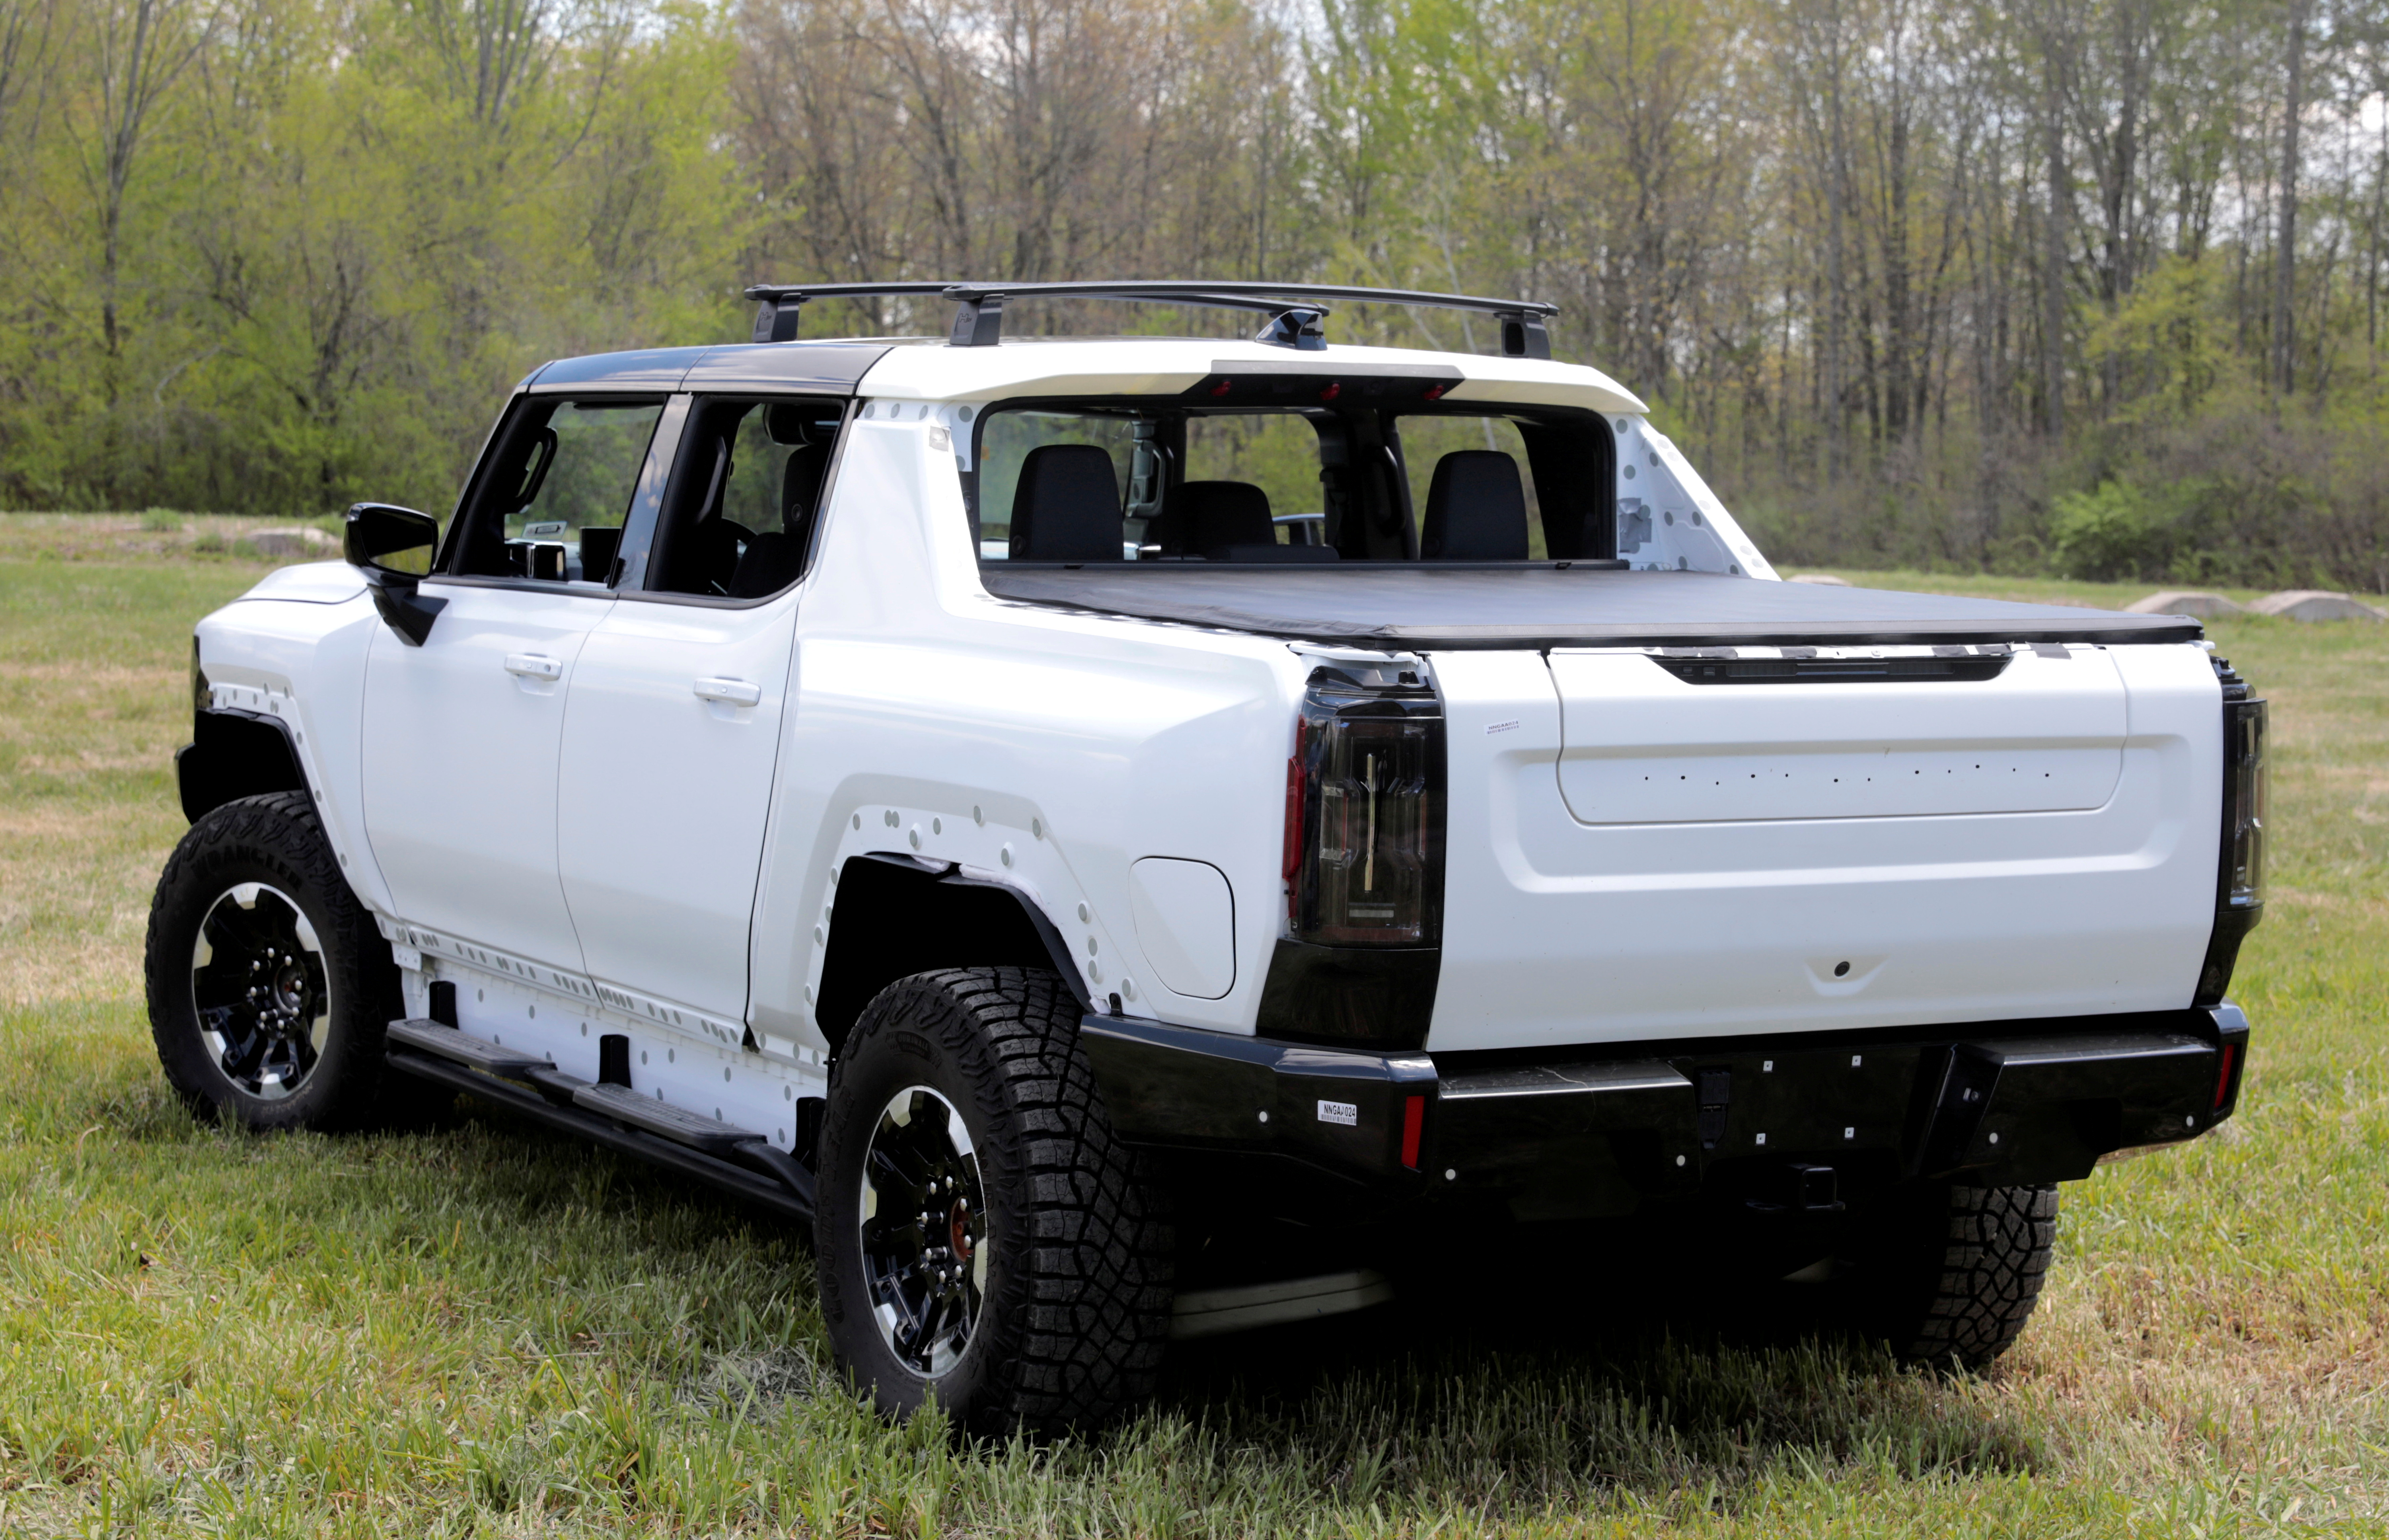 Pre-production version of GMC Hummer electric pickup in Milford